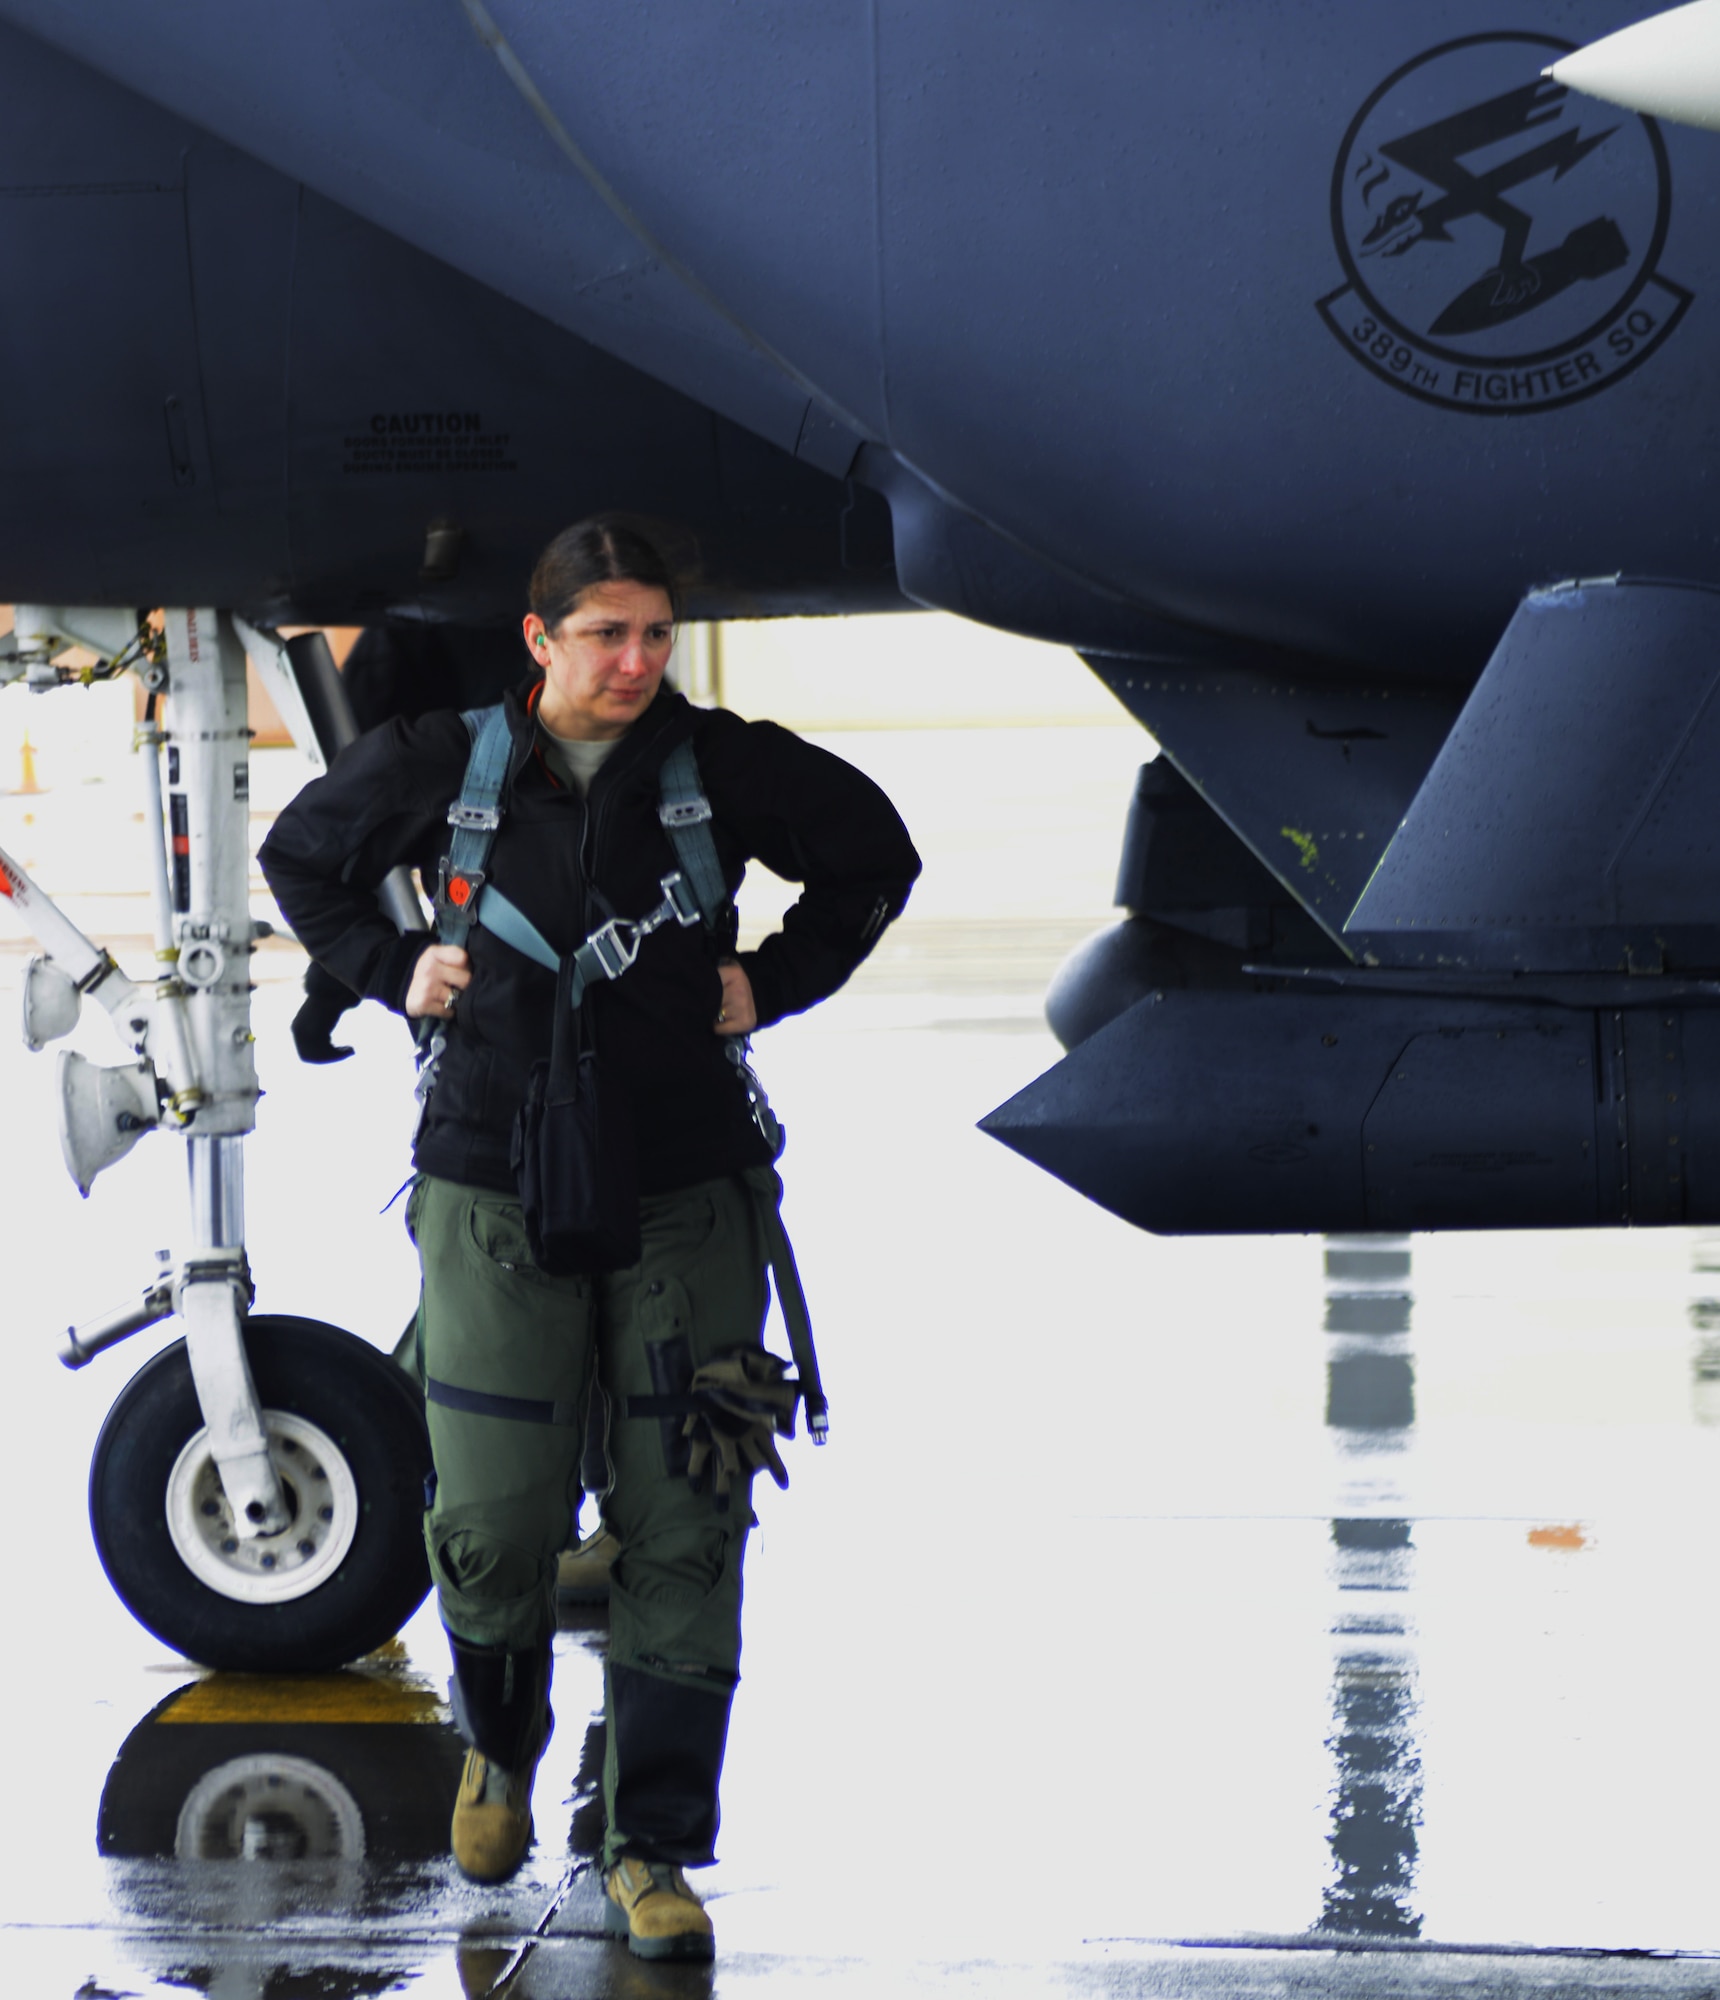 Lt. Col. Shelly Mendieta, 366th Fighter Wing chief of Wing safety, disembarks from an F-15E Strike Eagle March 10, 2014, at Mountain Home Air Force Base, Idaho. The combat exercise Gunfighter Flag is designed to prepare multiple joint and coalition terminal attack controller teams for upcoming deployments as well as provide proficiency training for aircrews. Despite the wet and soggy conditions, aircrews performed close-air support missions for the JTACs on the ground. (U.S. Air Force photo by Senior Airman Ben Sutton/Released)